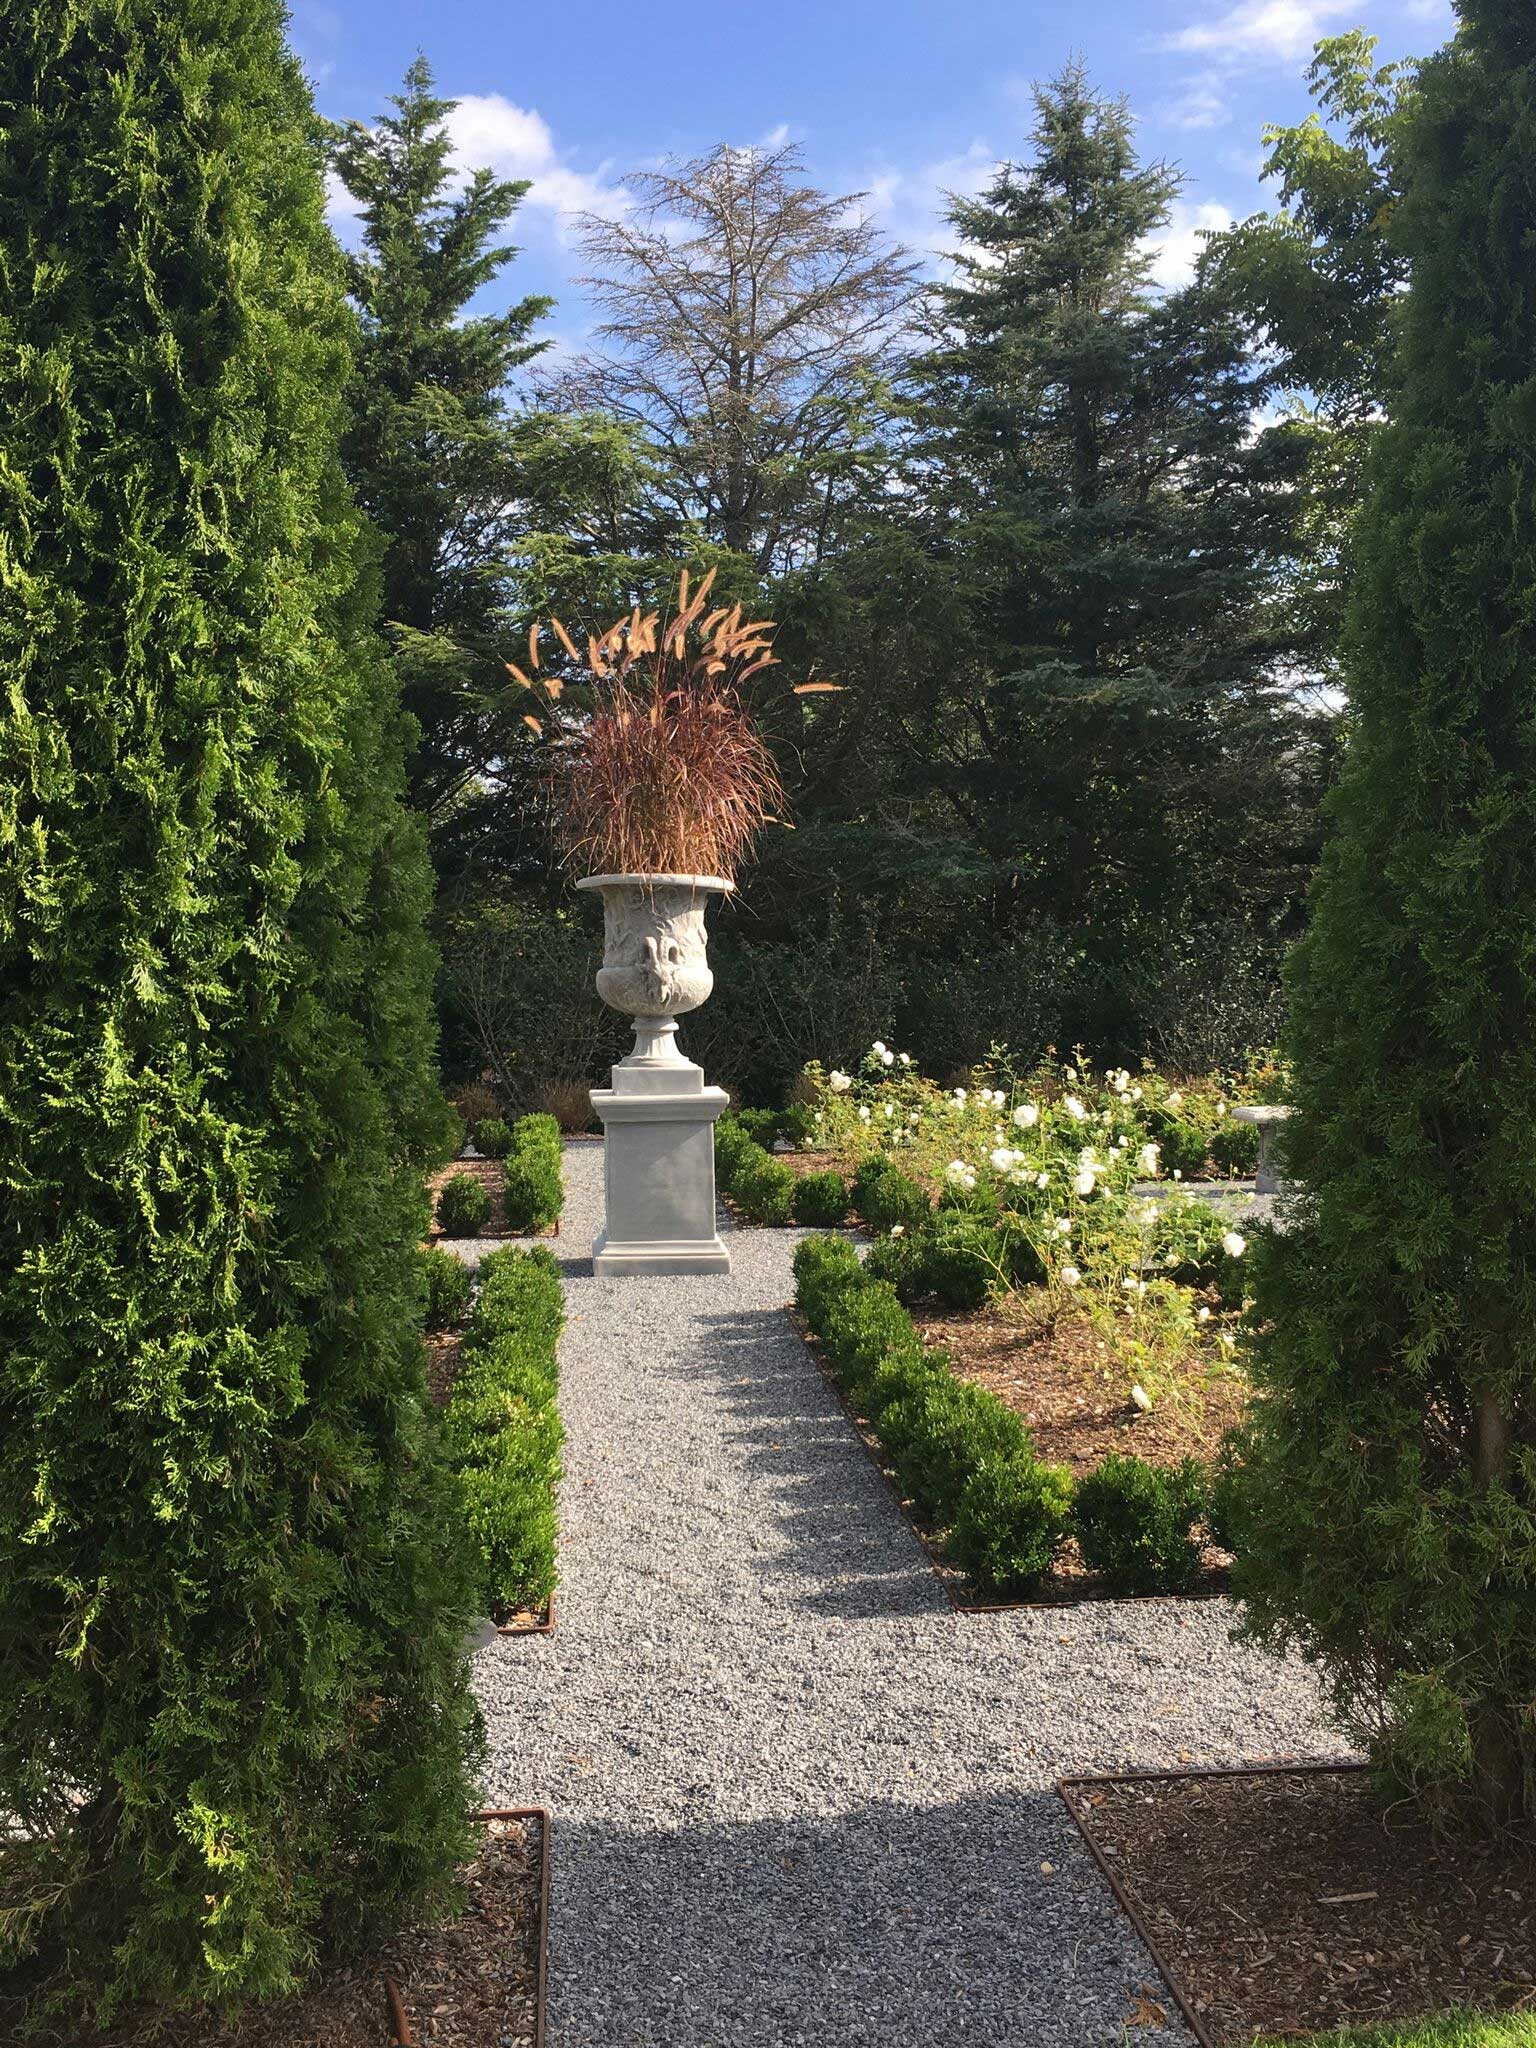 Behind the house, passing through an Arborvitae hedge, one arrives at a Parterre Garden. At the intersection of the gravel pathways on either end of the garden are oversized urns with plantings that rotate through the seasons. The ornamental grasses are coloring up in the early fall.